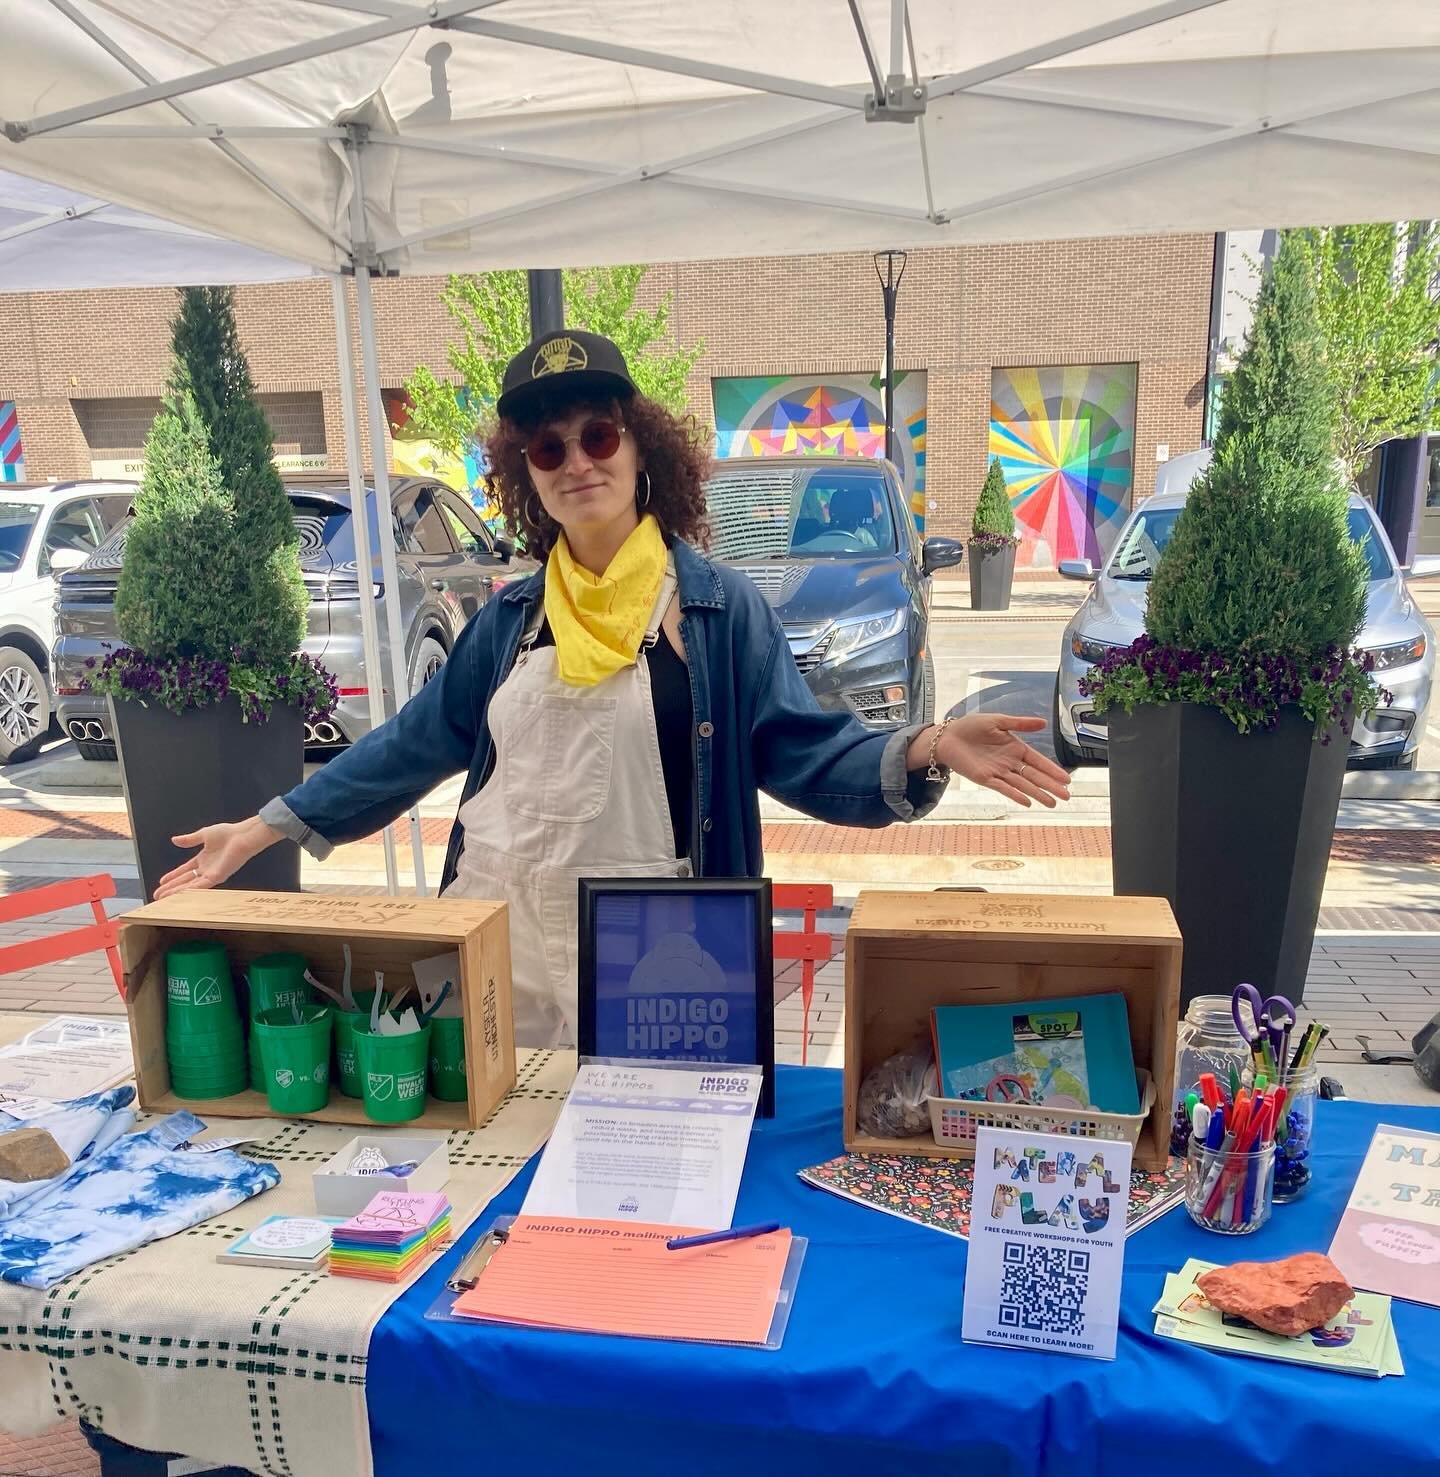 We&rsquo;re here at the @courtstreetcincy Flower Market 🌷🦛

Come say hey to Abby &amp; Emily and get some upcycled craft kits and zinnias from @lorefloral 💙

Here until 3 PM or until the wind blows us away 🌀

Our shop IS open 12-6 PM, go say hey 